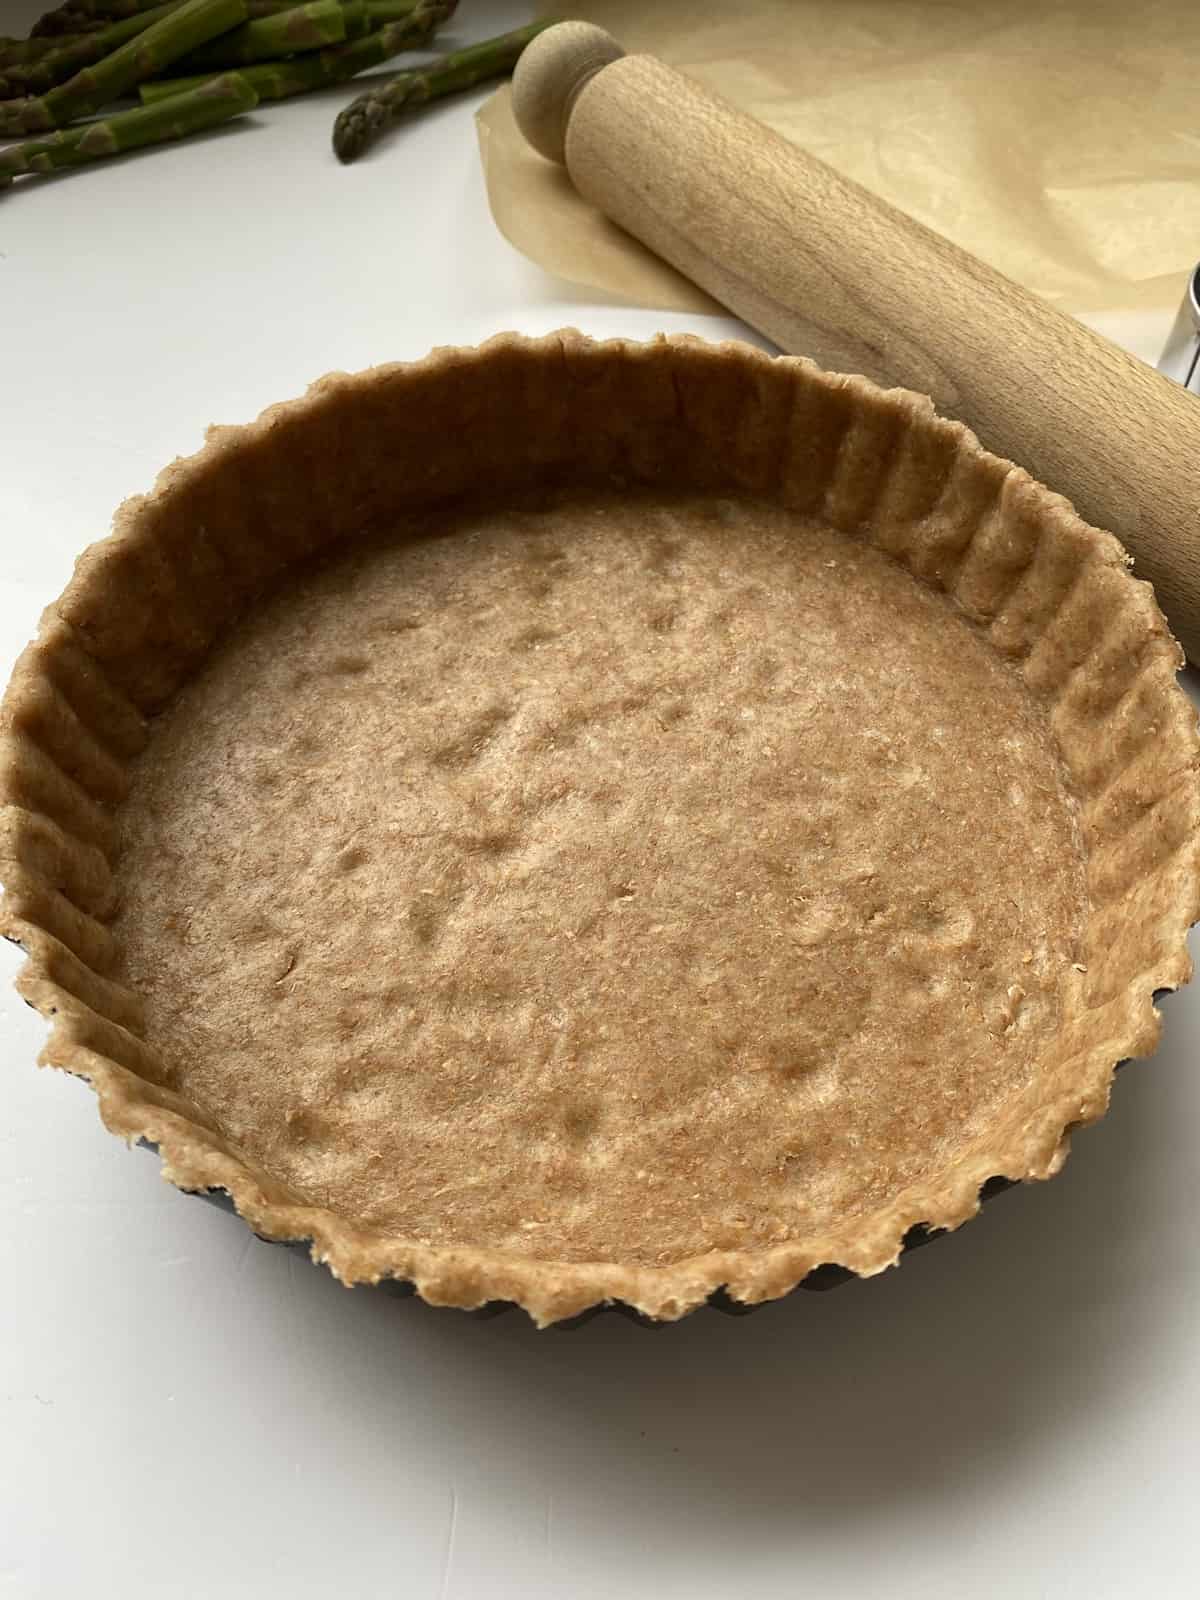 Tart Pan lined with Shortcrust Pastry.